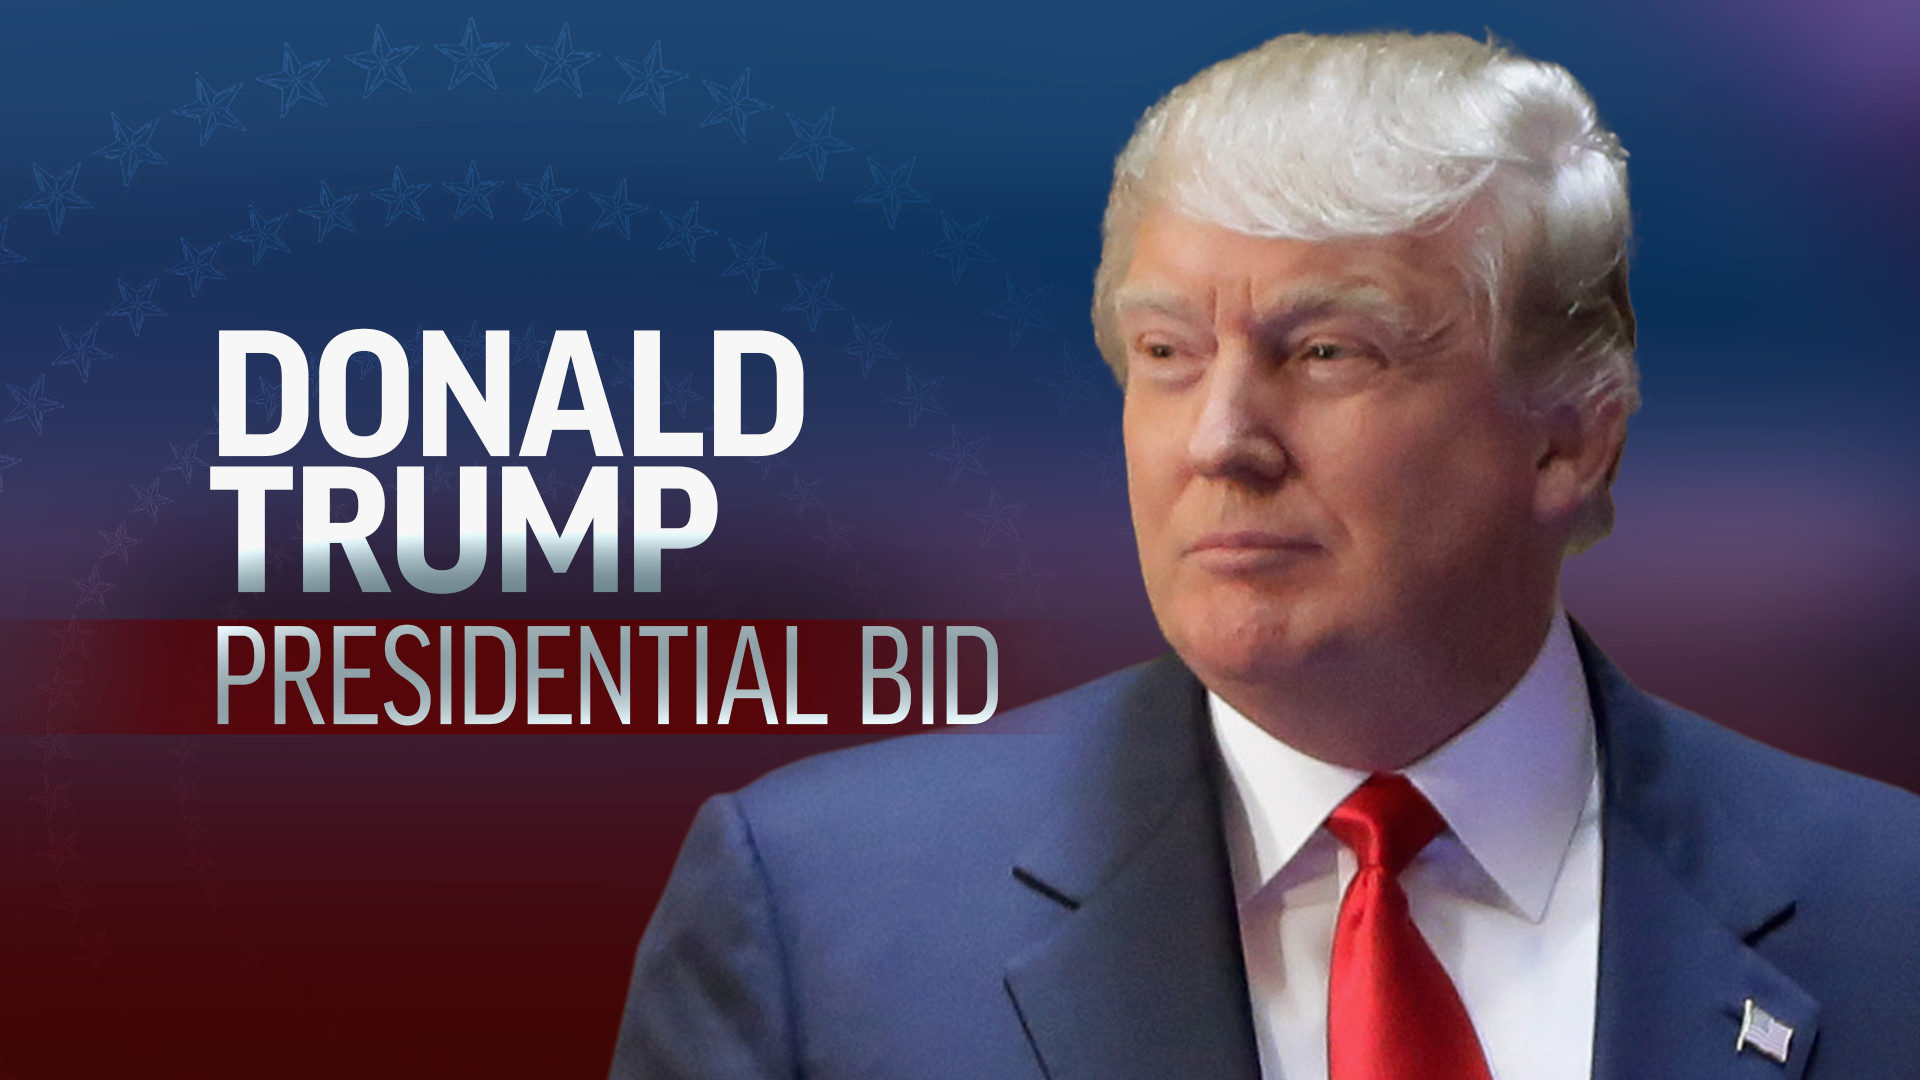 Donald Trump Wallpapers 2016 Find best latest Donald Trump Wallpapers 2016 in HD for your